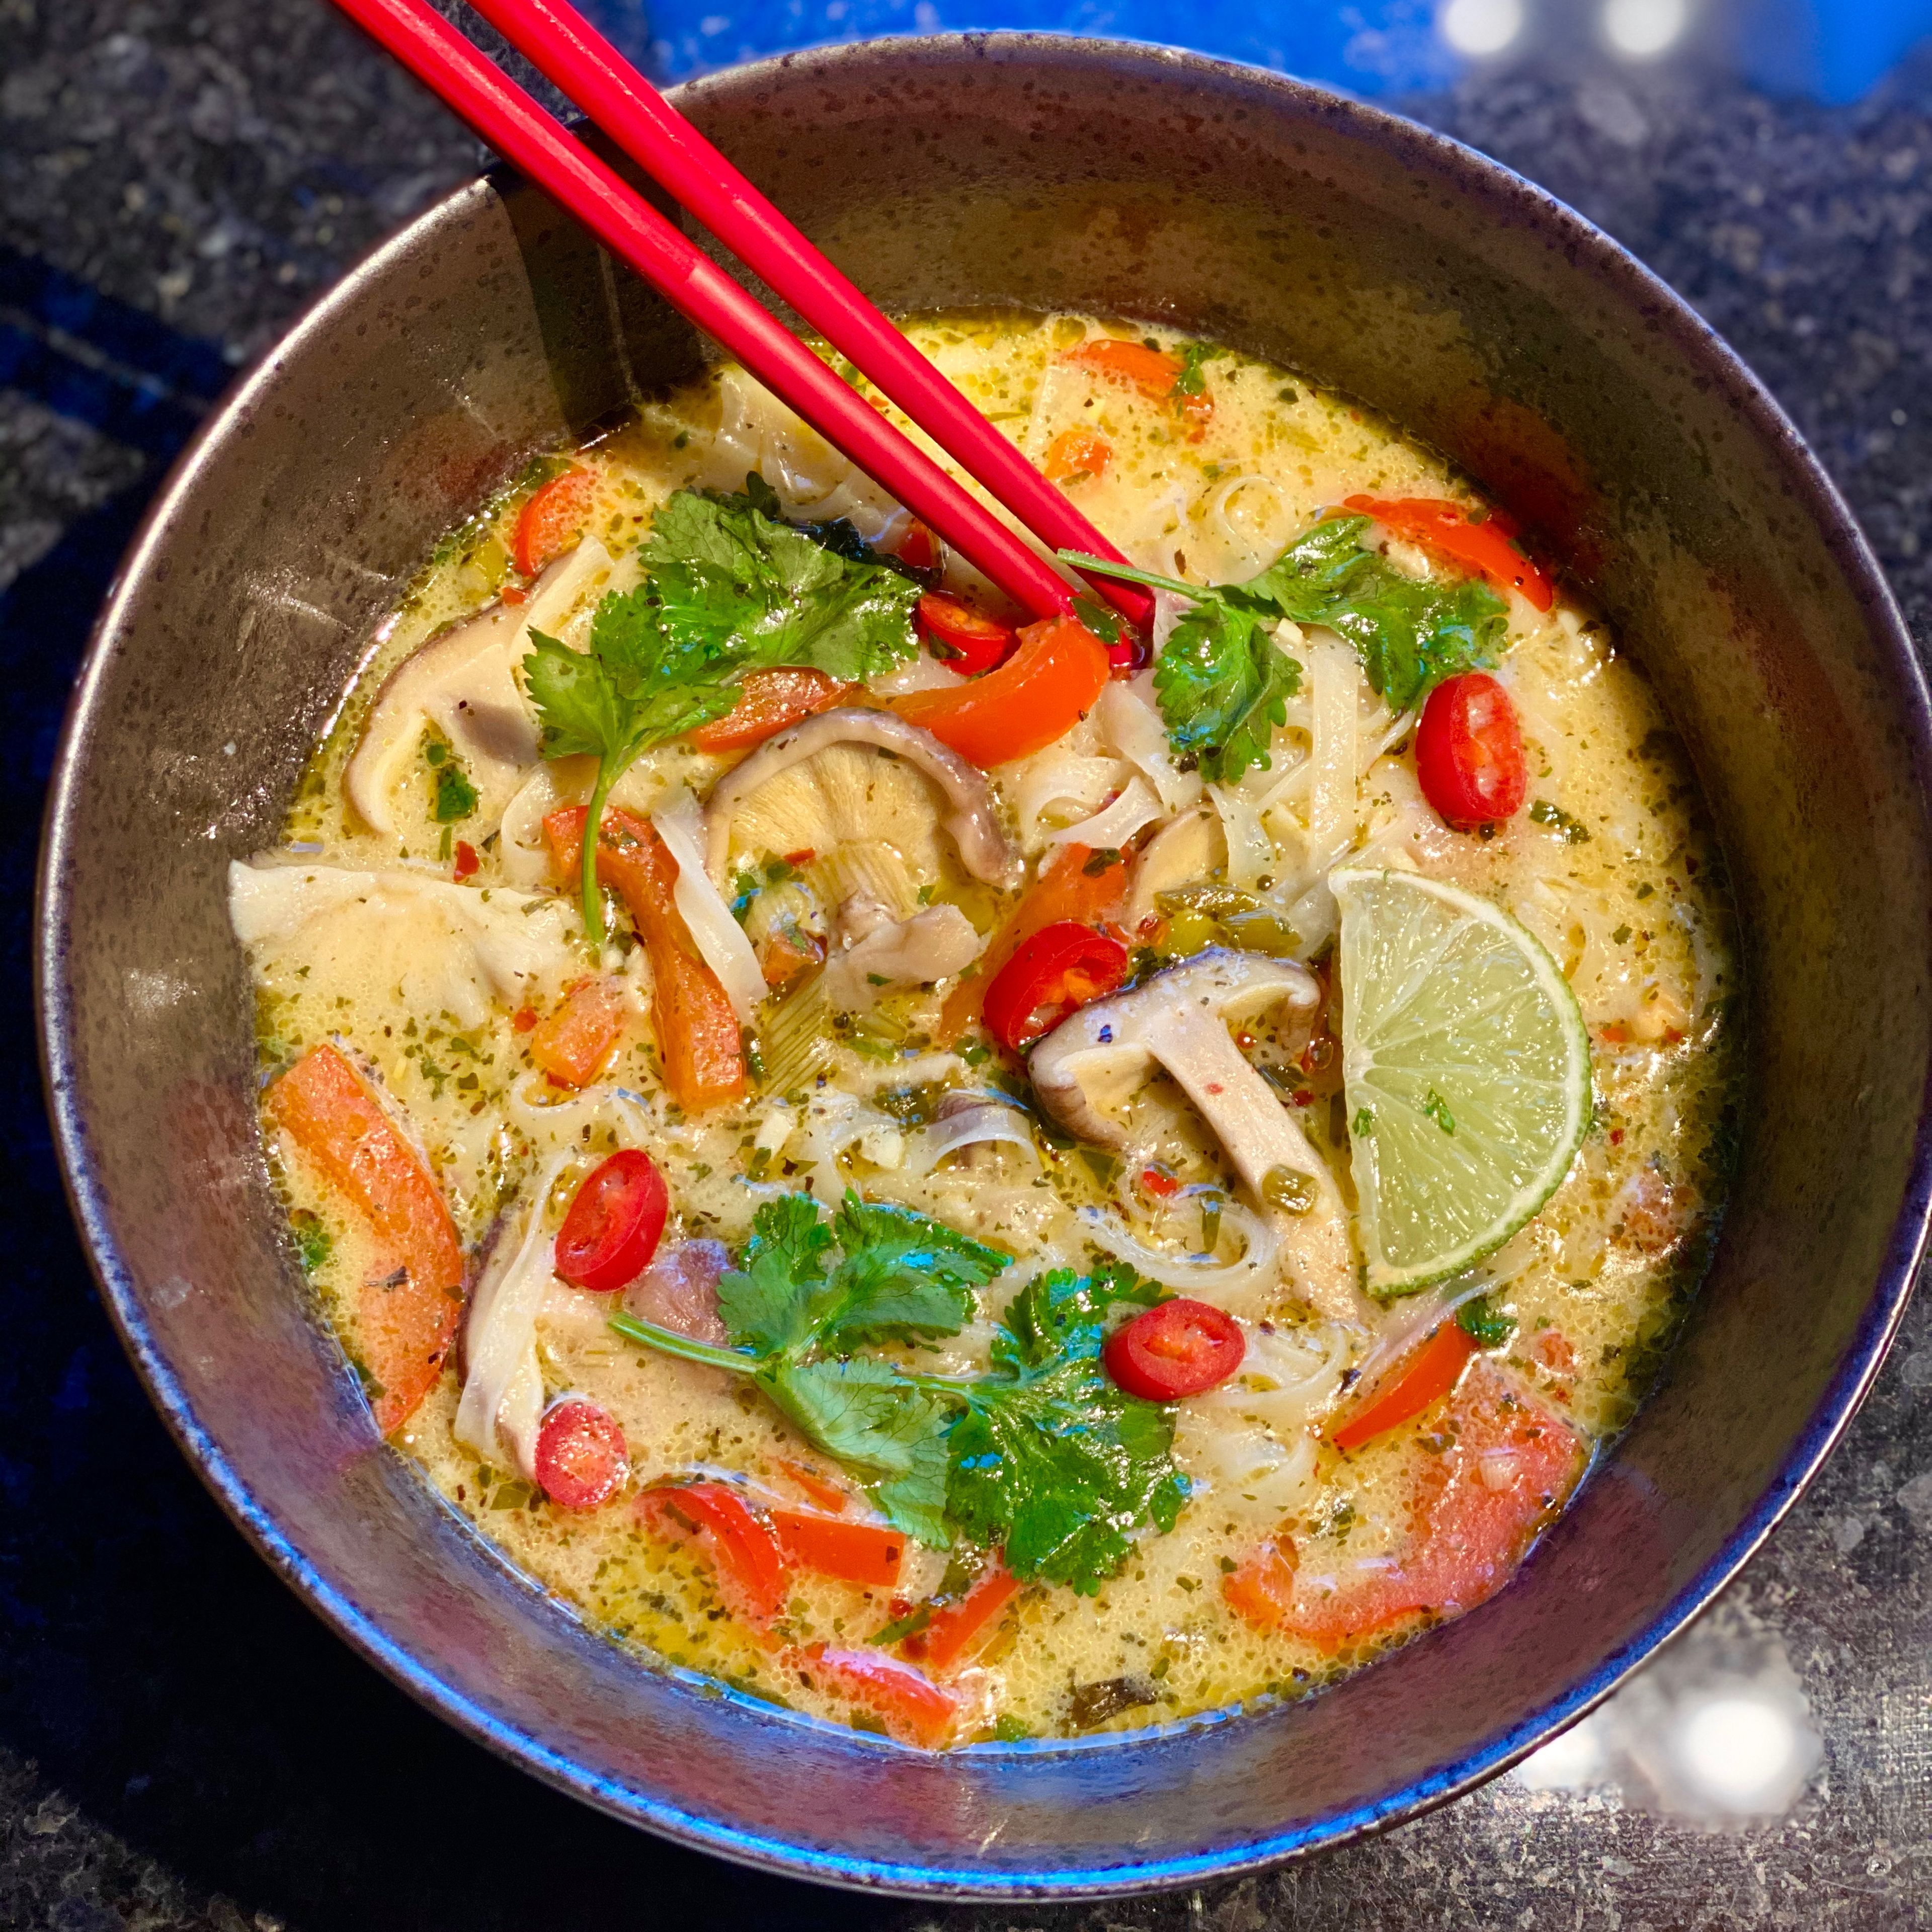 Green Thai curry soup with rice noodles